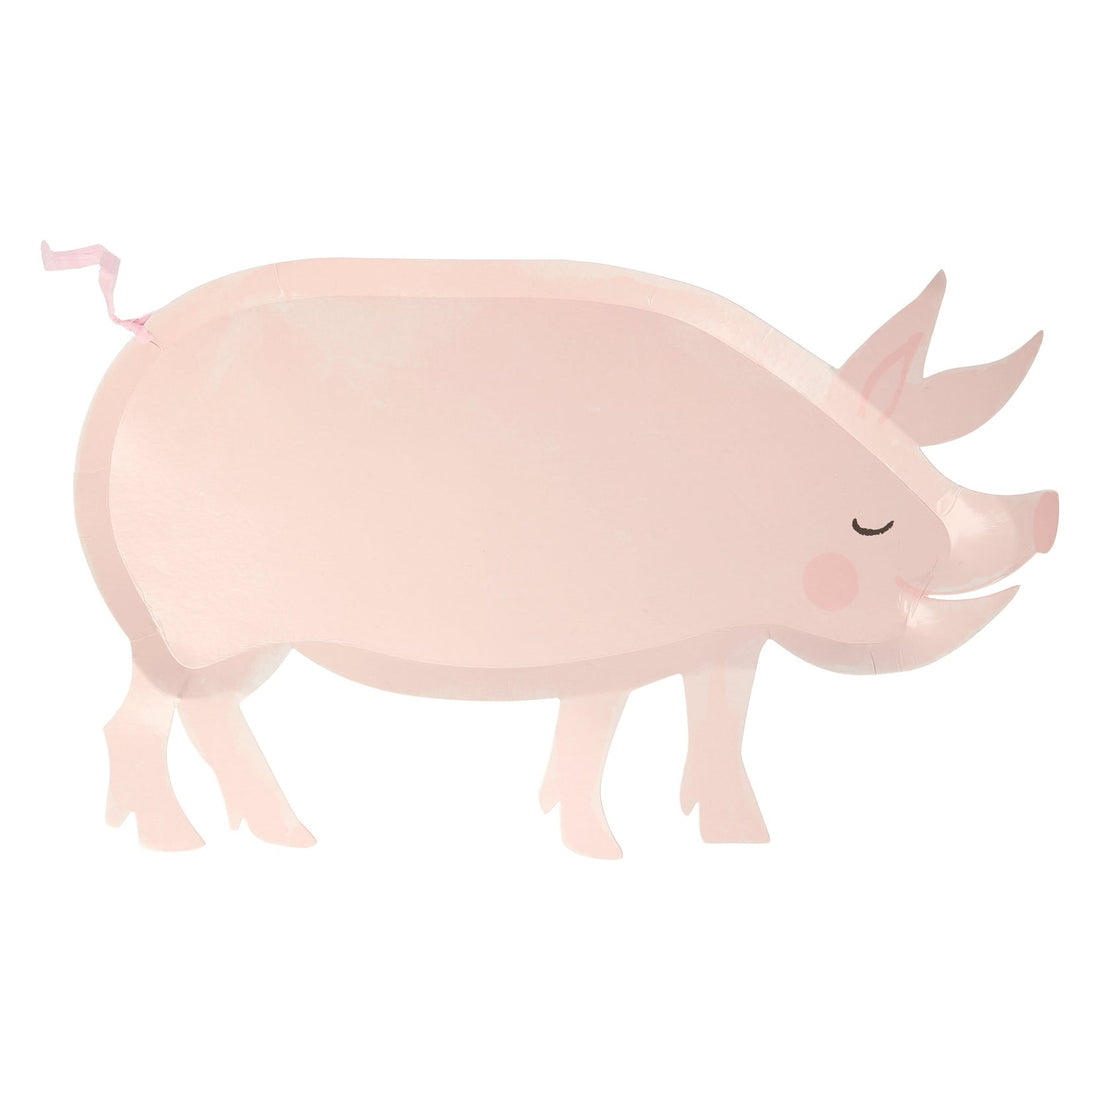 Illustration of a cartoon pig with a simple, eco-friendly design on a white background from the Meri Meri On the Farm Pig Plates.